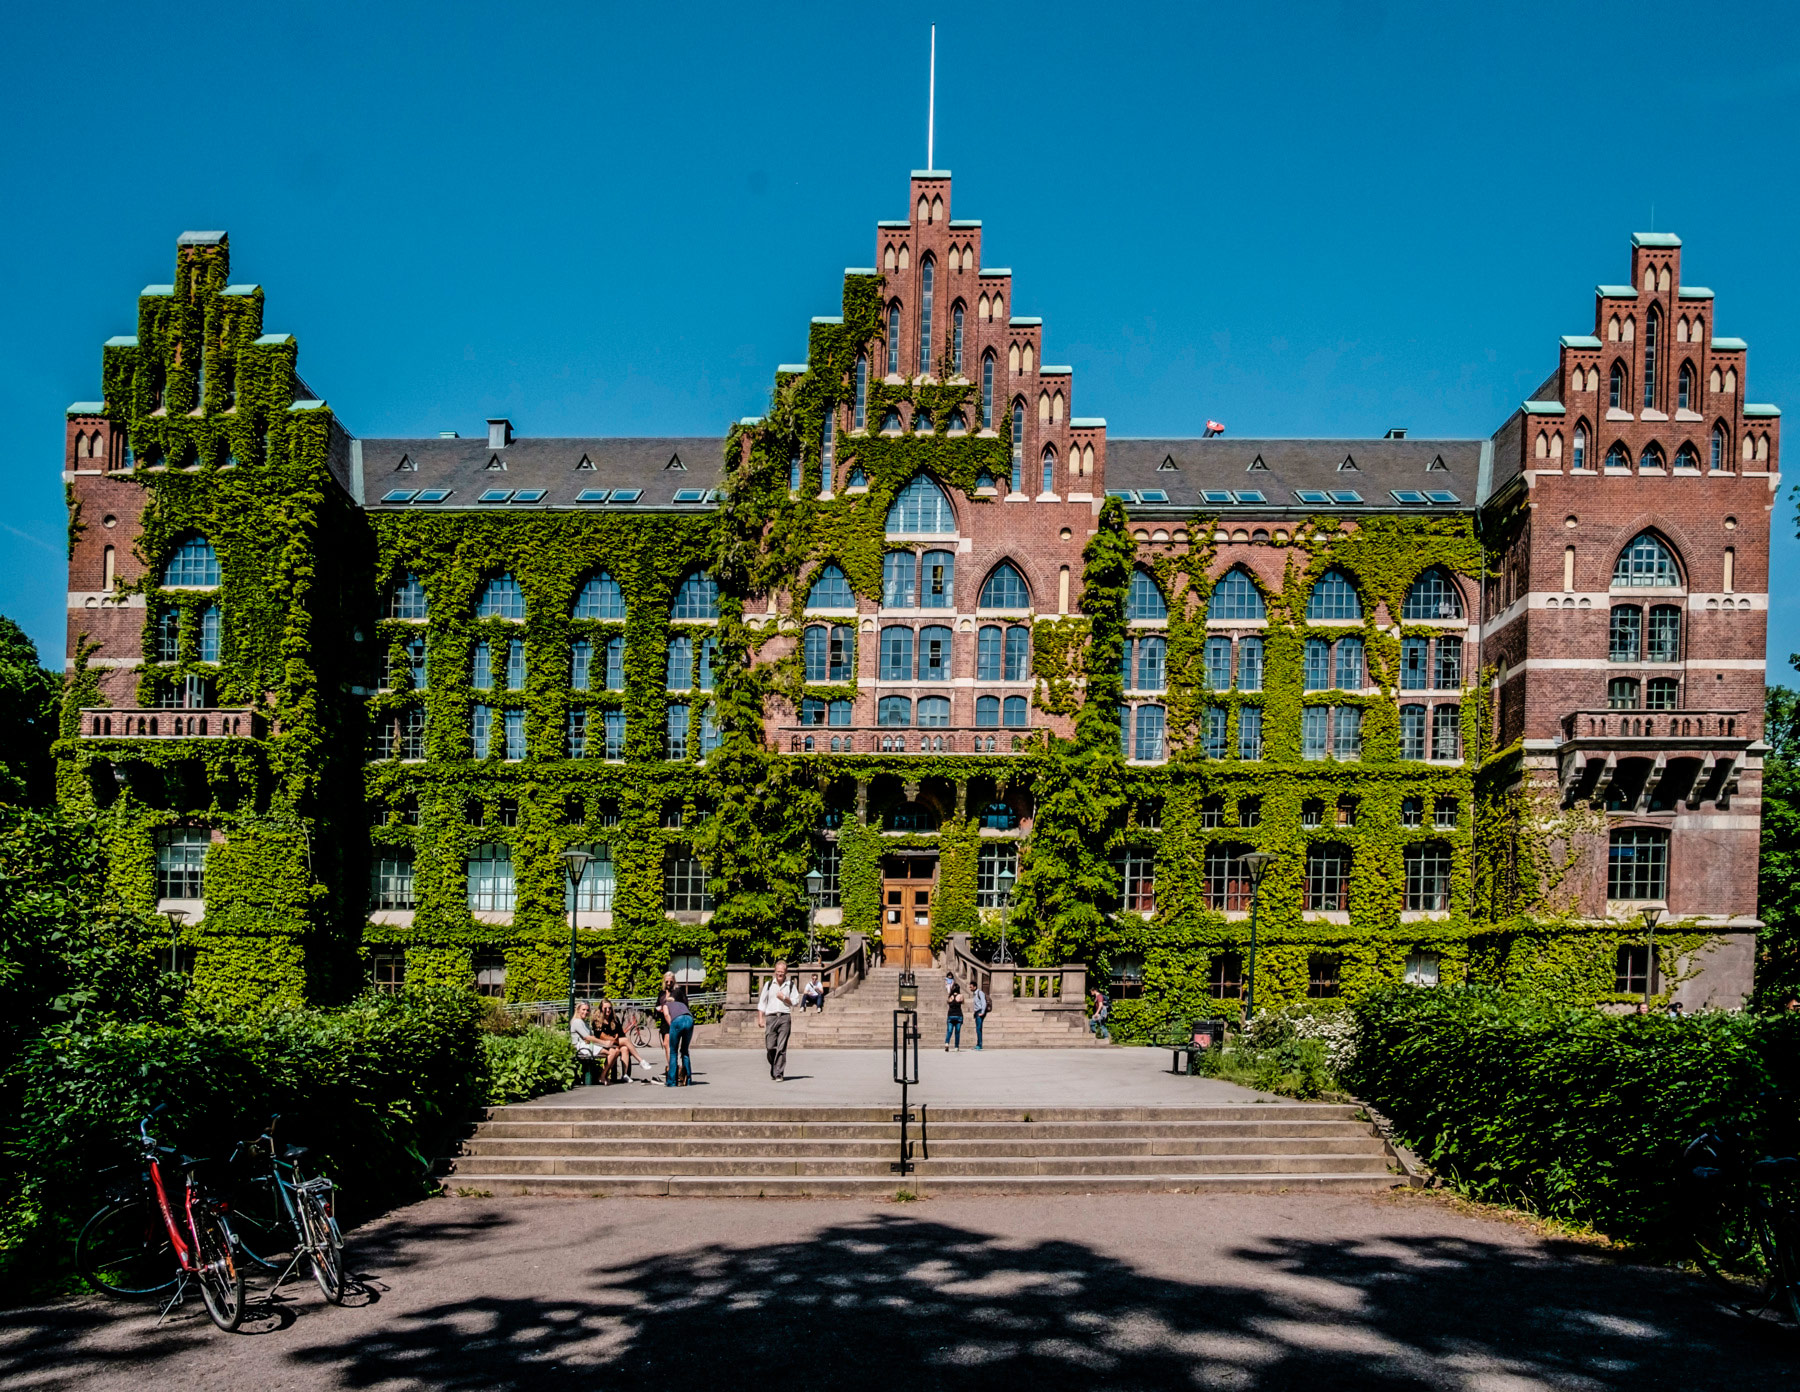 Explore the many opportunities available at Lund